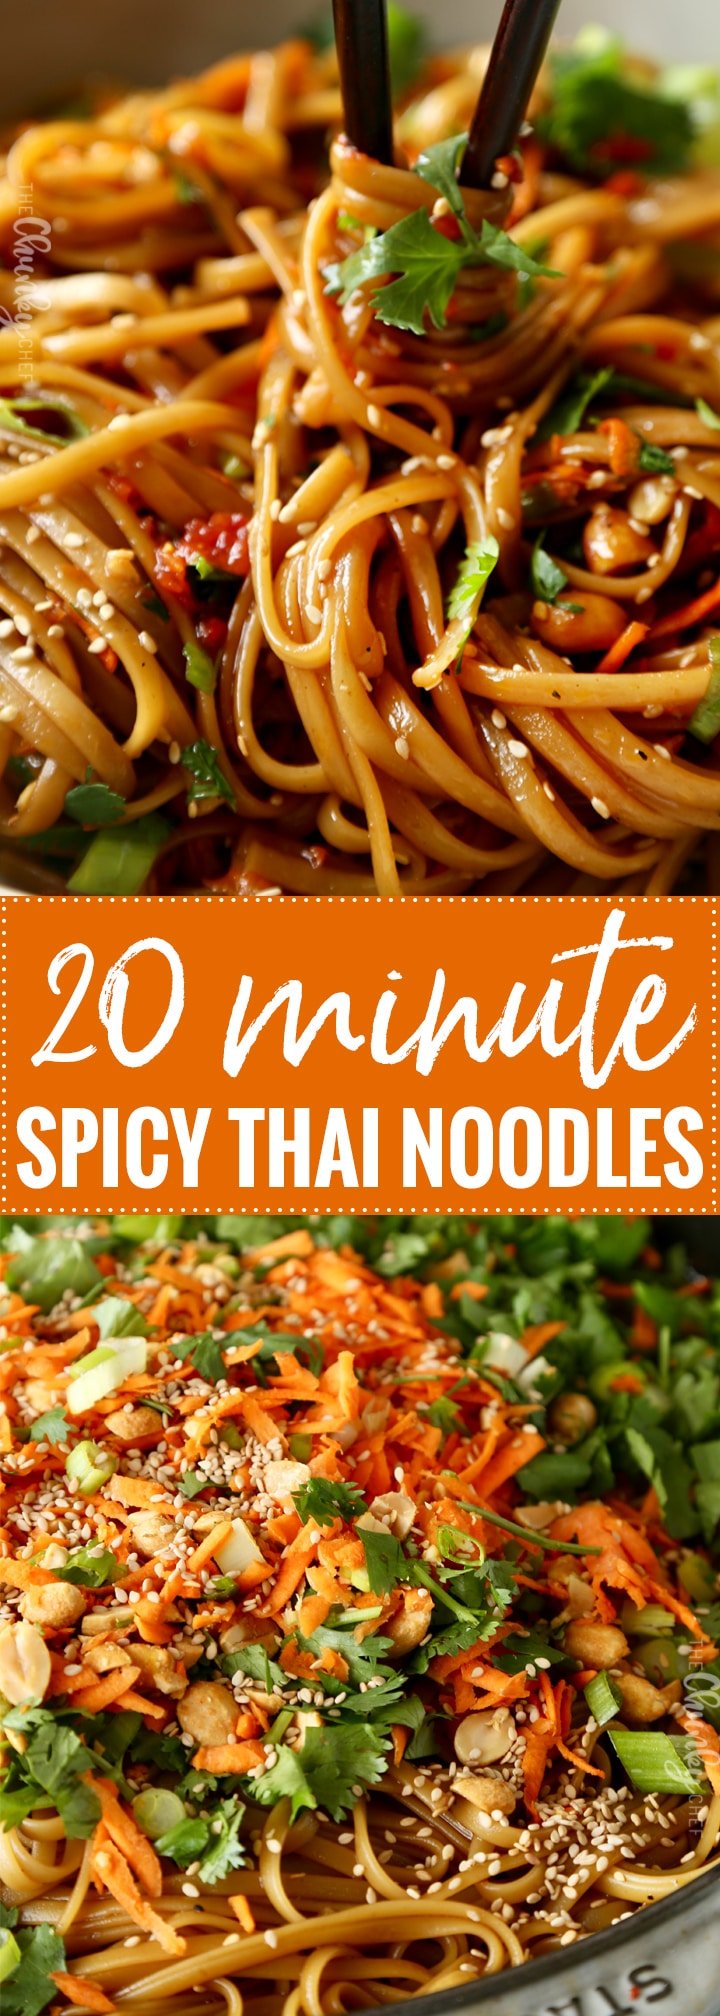 Spicy Thai Noodles | Ready in just 20 minutes, these spicy Thai noodles are made with everyday ingredients and insanely flavorful!  This recipe is vegetarian, but optional protein additions mentioned in post! | The Chunky Chef | #easyrecipe #thai #noodles #weeknightdinner #vegetarian